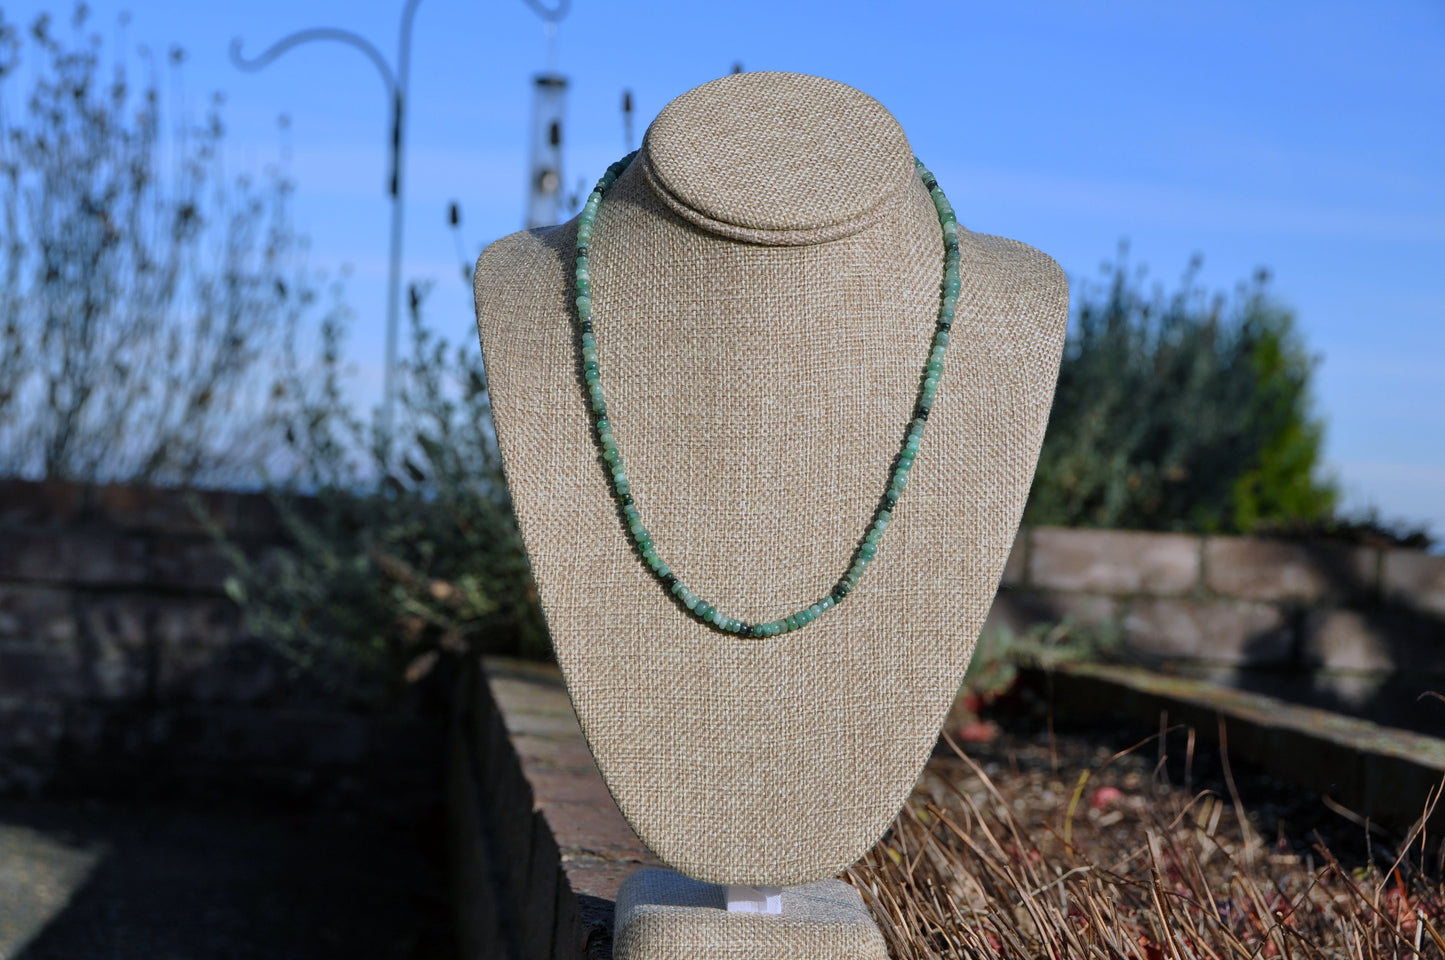 Real Emerald Birthstone Necklace